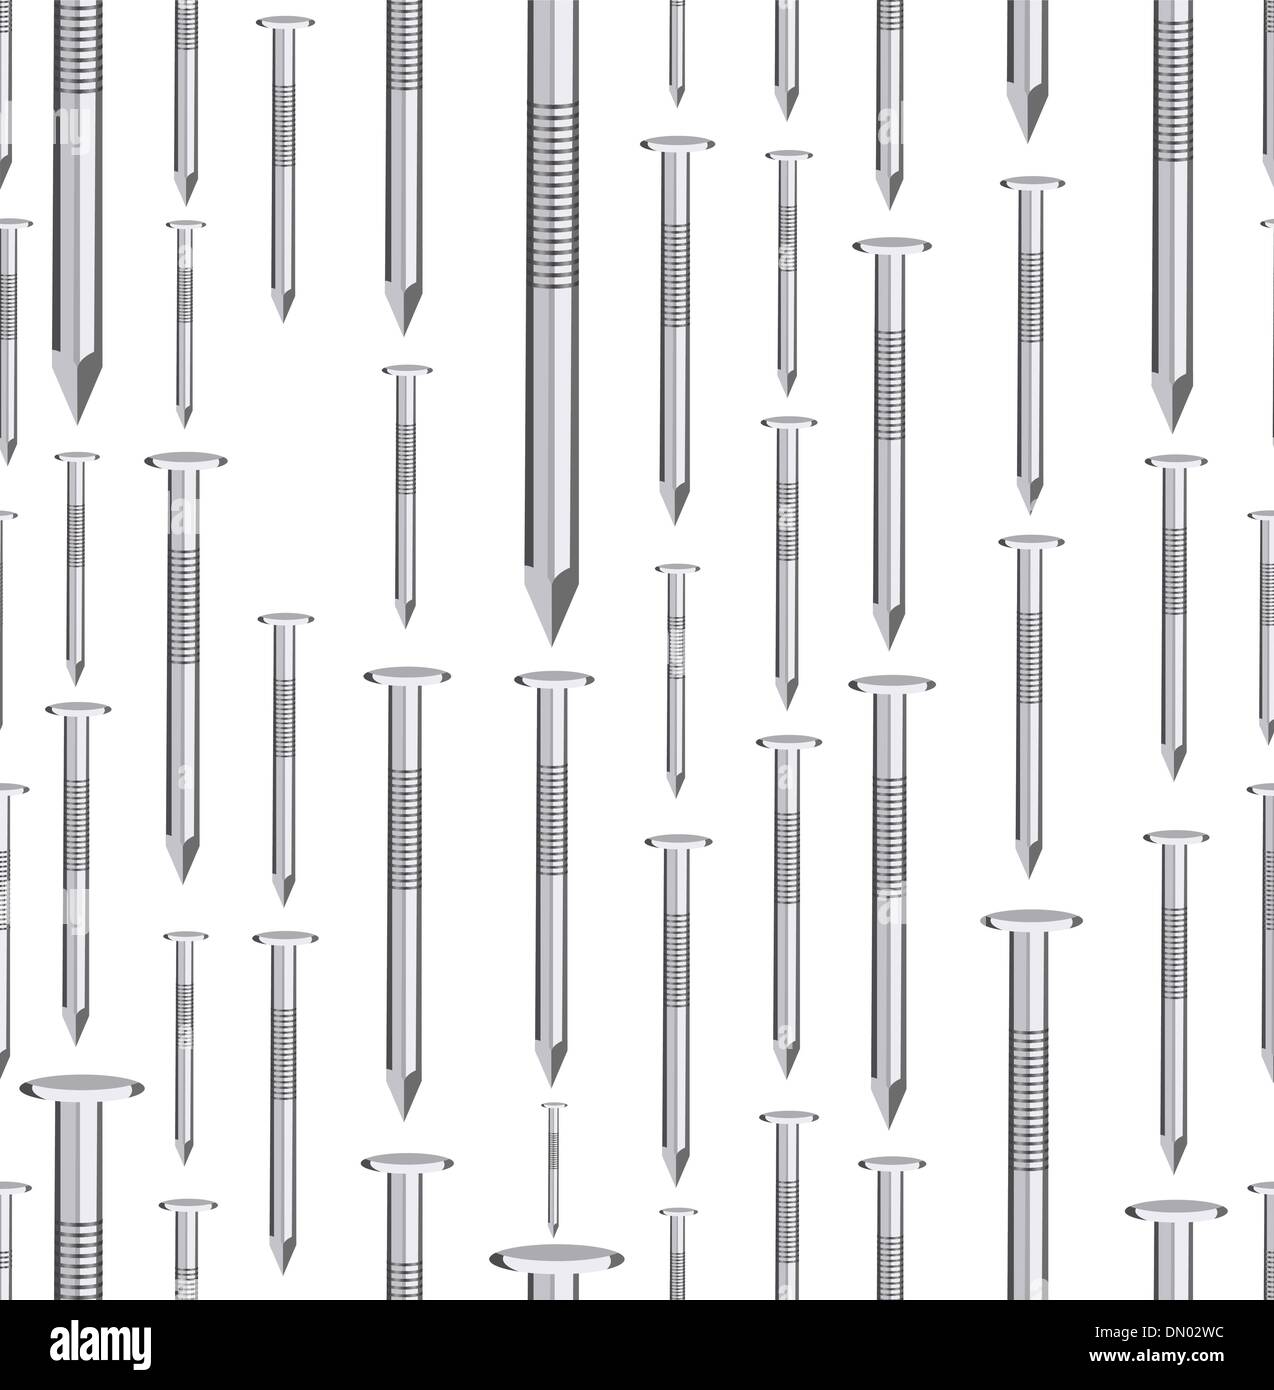 Fasteners - Types of Nails - Archtoolbox